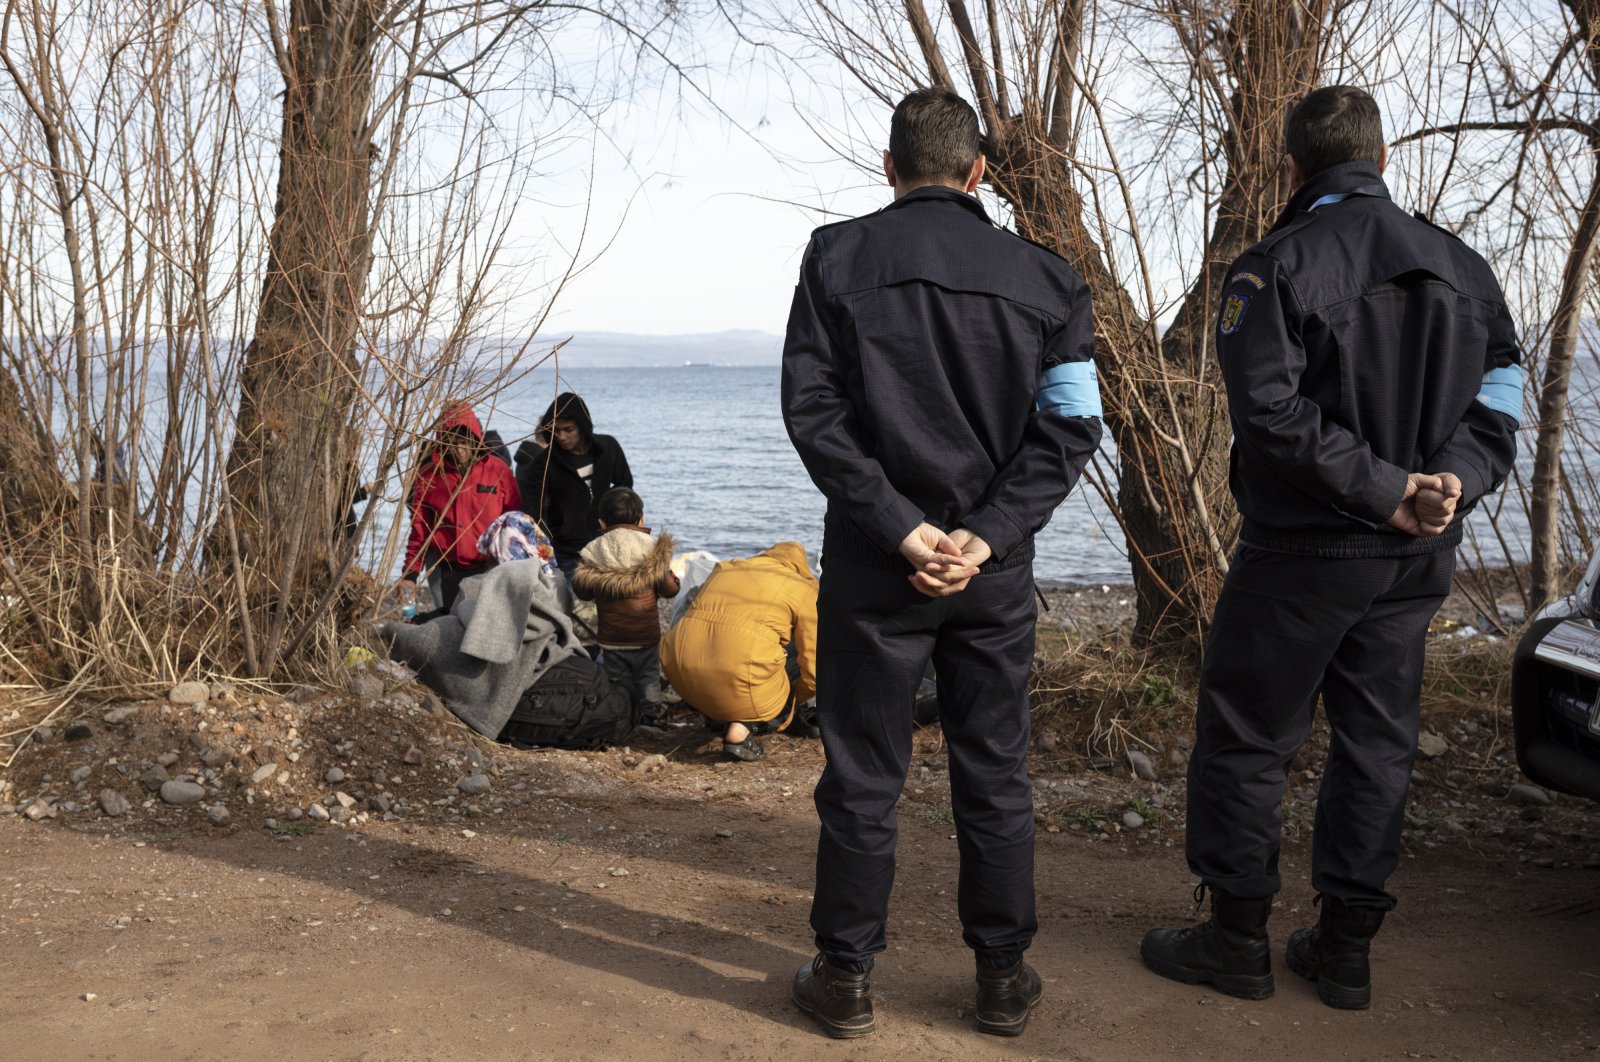 Frontex border officers stand by migrants on the shore near the village of Skala Sikamineas on the island of Lesbos, Greece, March 1, 2020. (Getty Images)